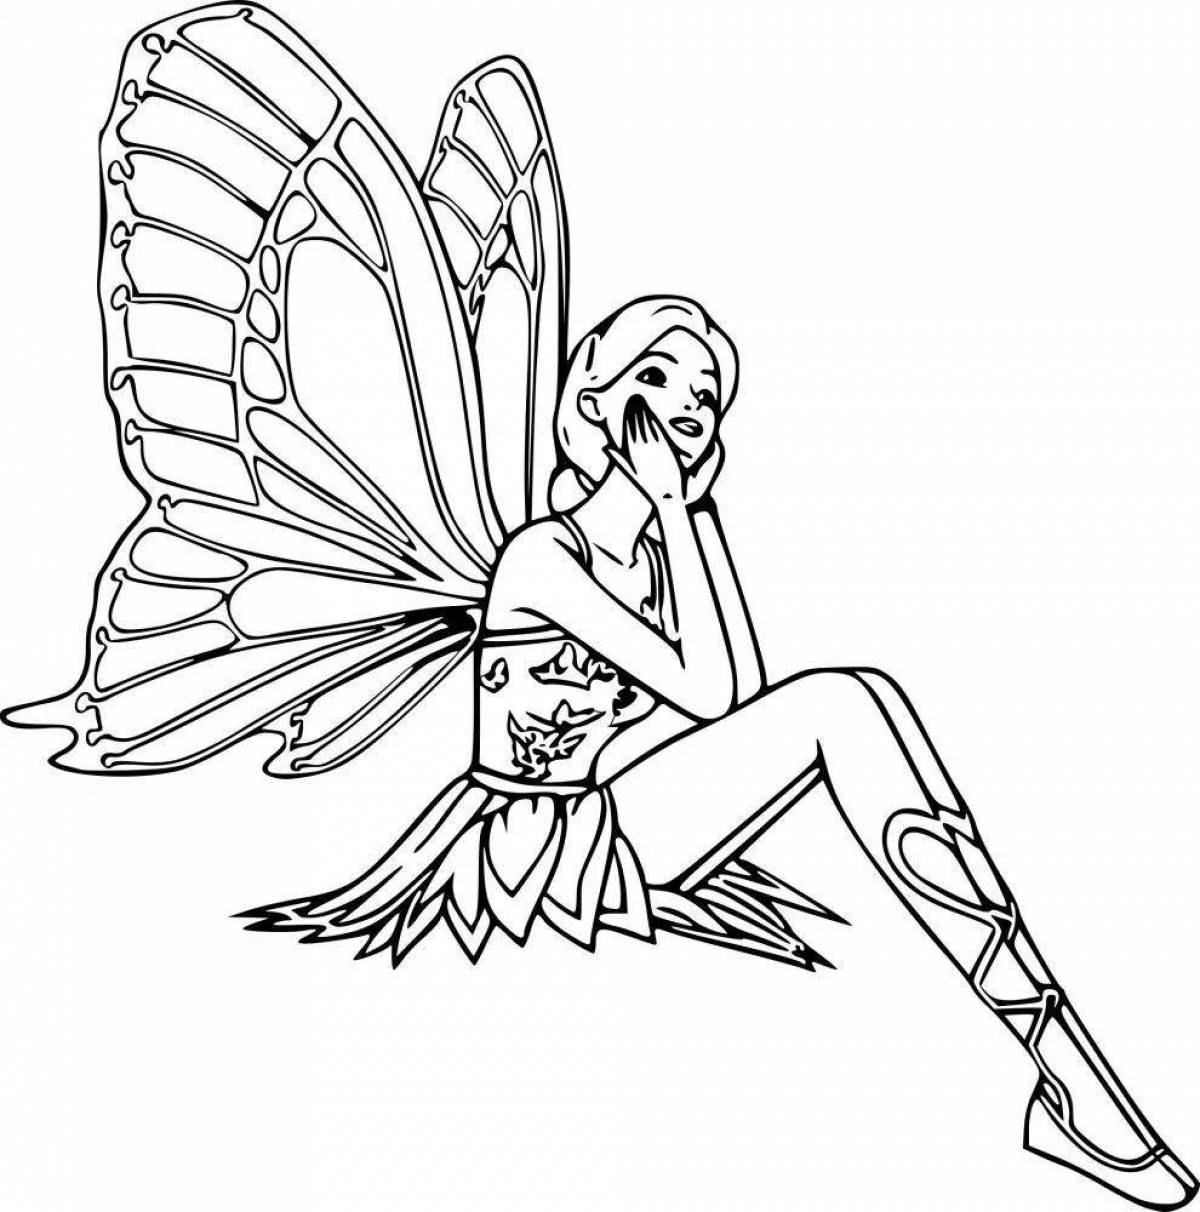 Charming coloring girl with wings